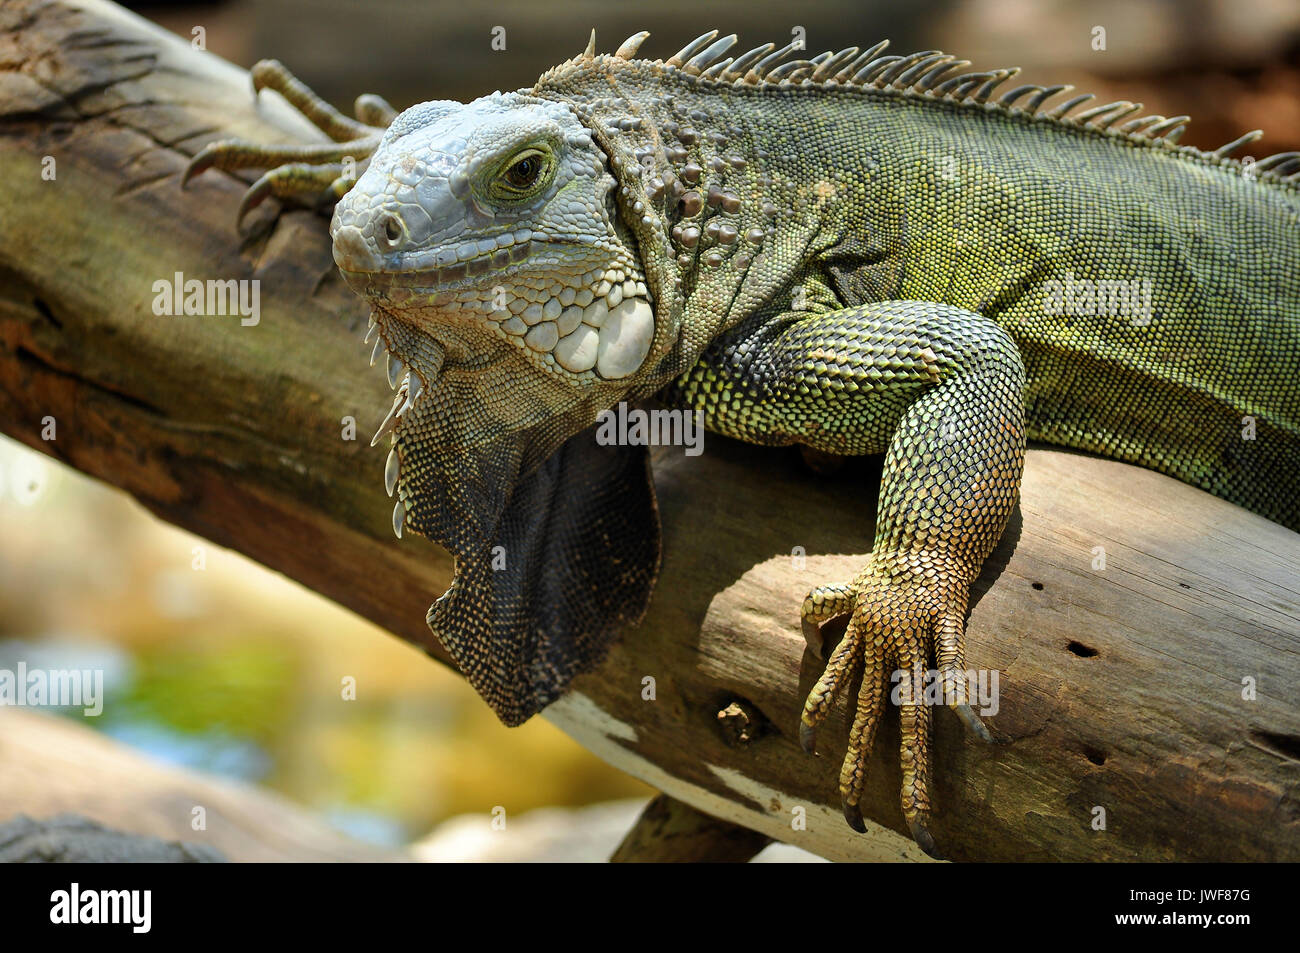 The green iguana ranges over a large geographic area, from southern Brazil and Paraguay to as far north as Mexico and the Caribbean Islands; and in th Stock Photo